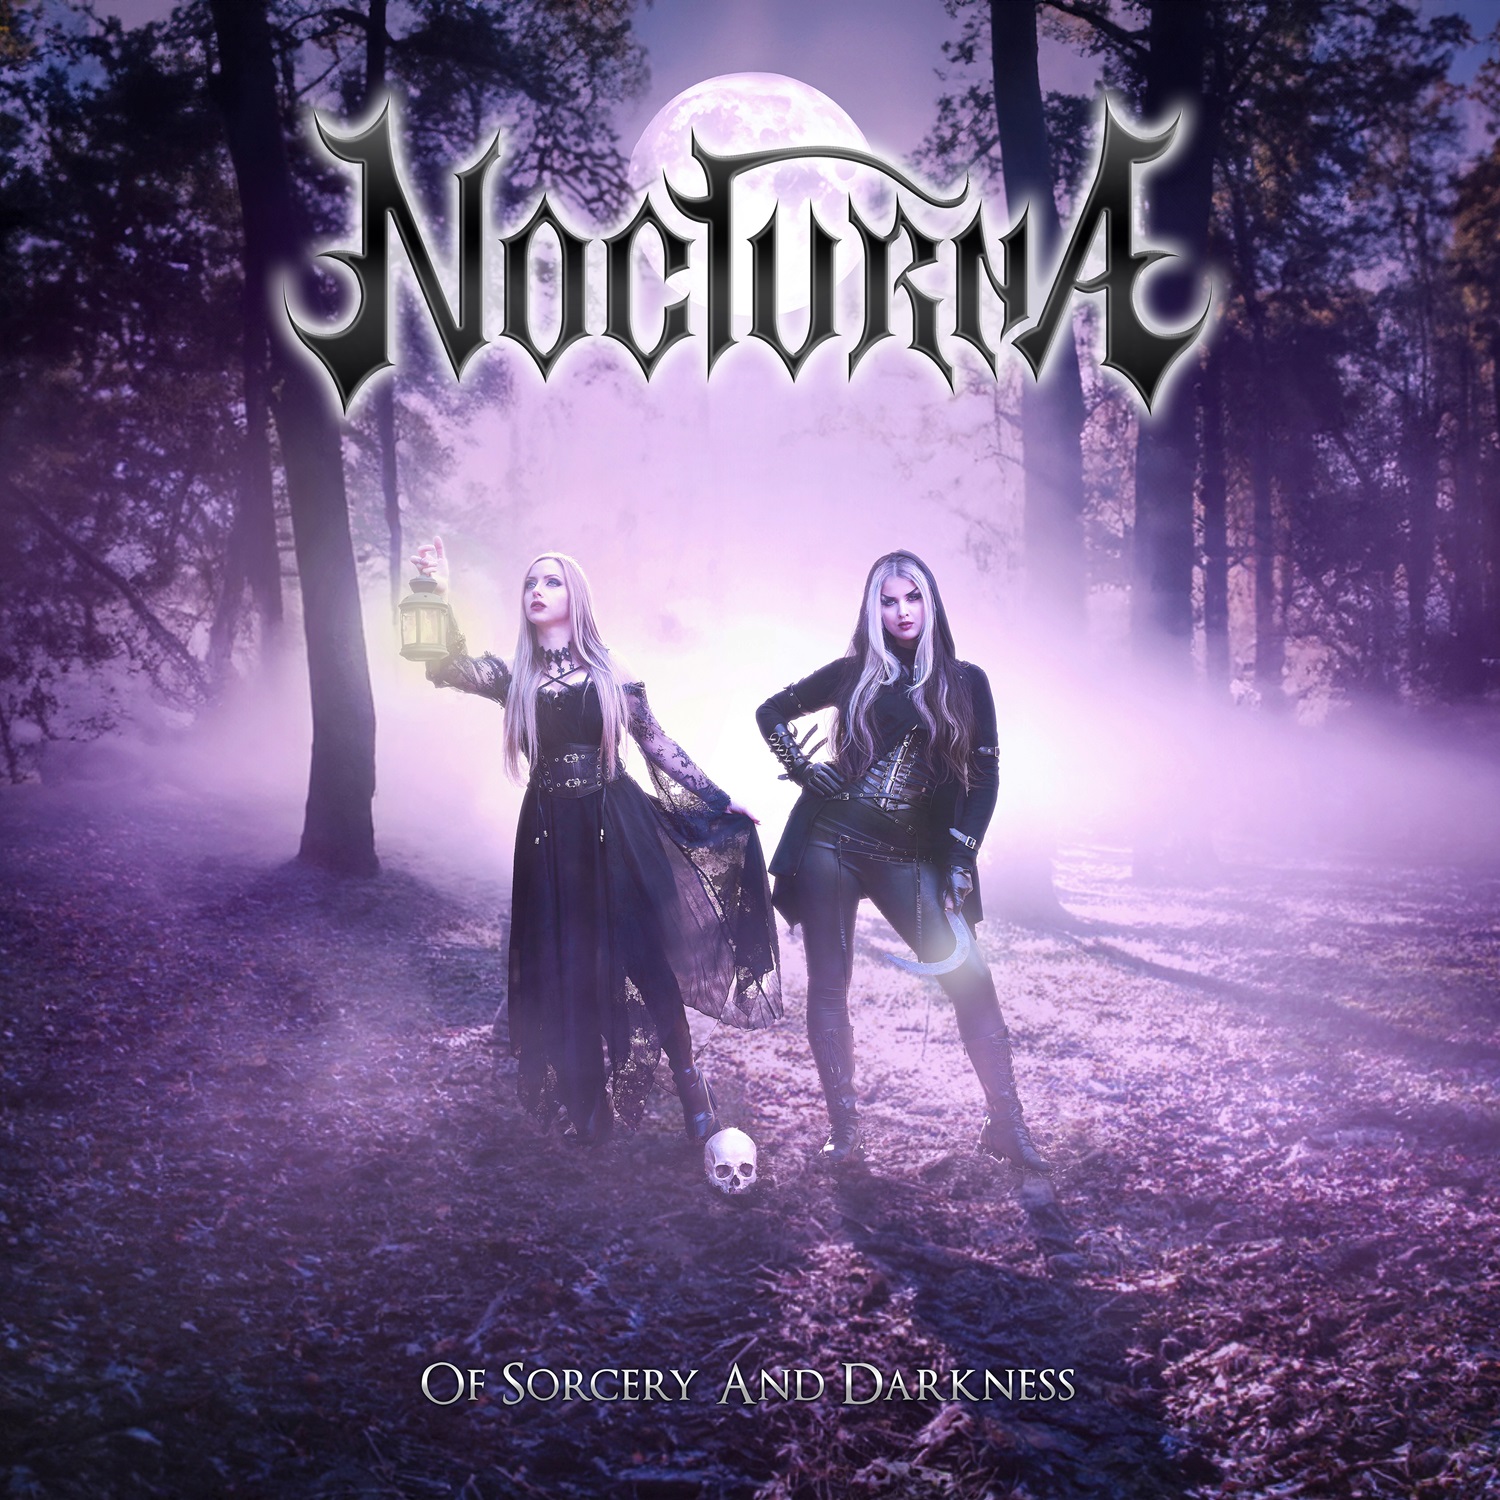 Nocturna Returns with Haunting Duality on "Of Sorcery And Darkness"